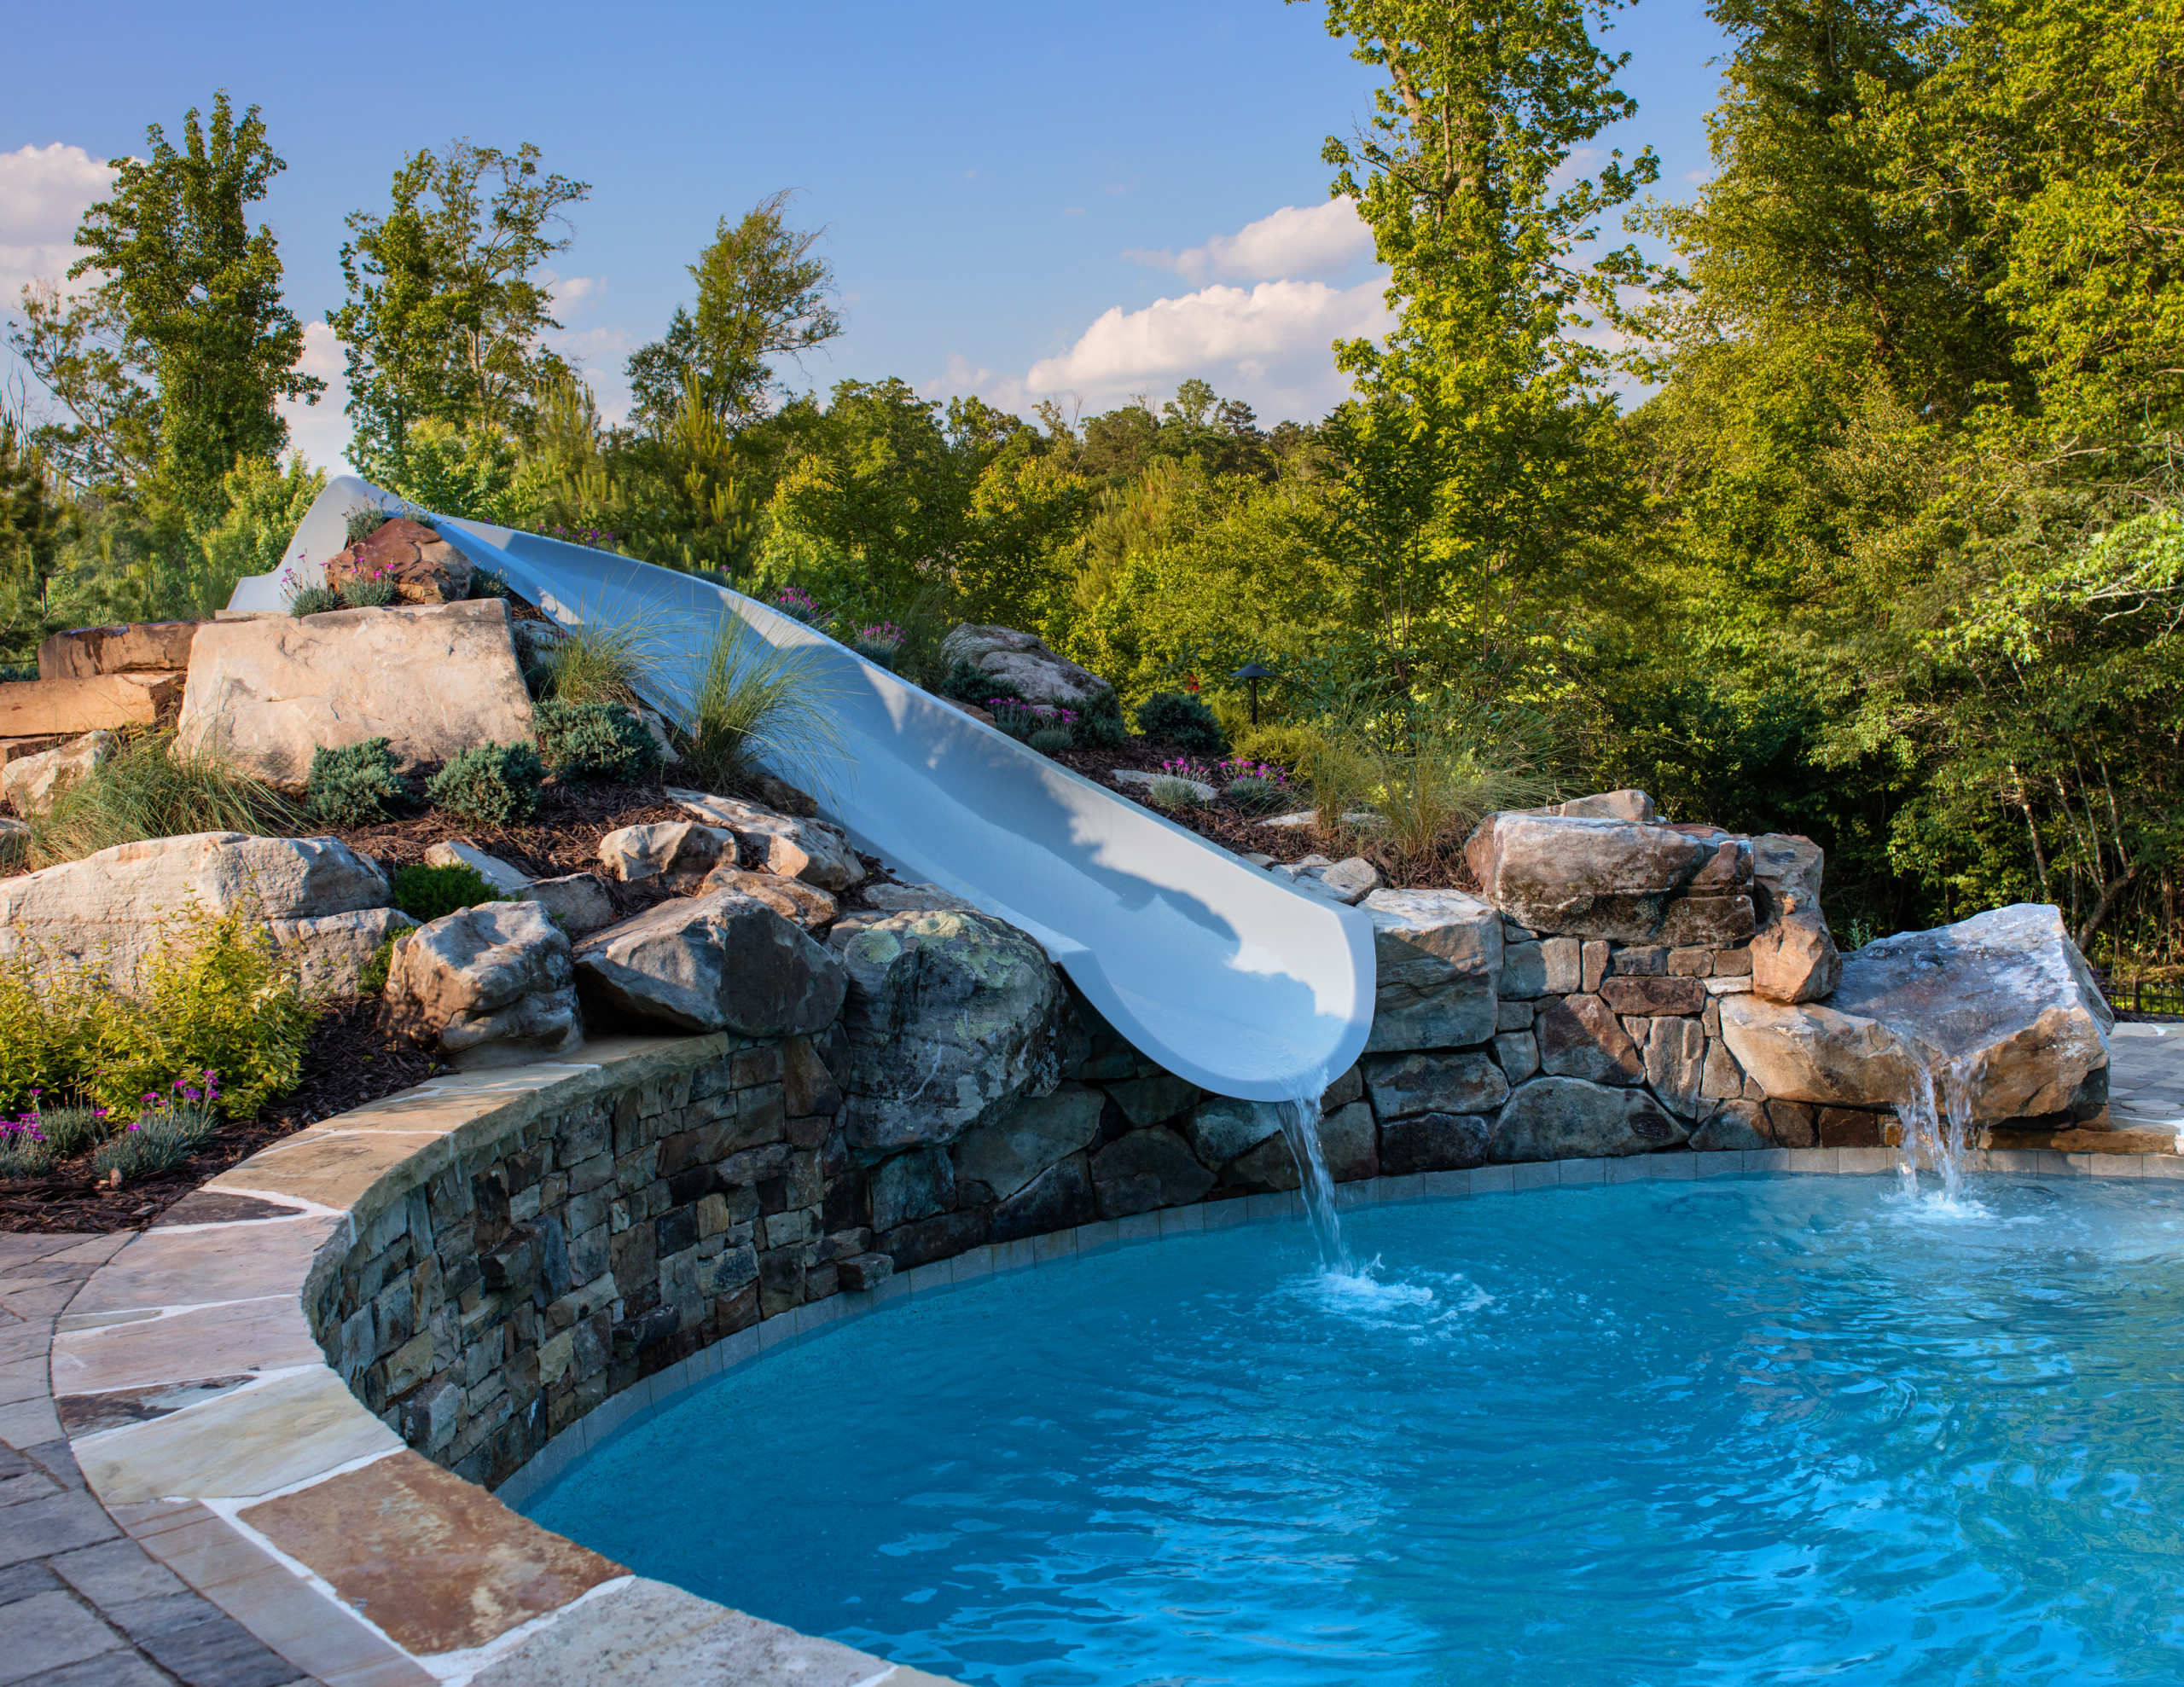 75 Water Slide Ideas You'll Love - October, 2023